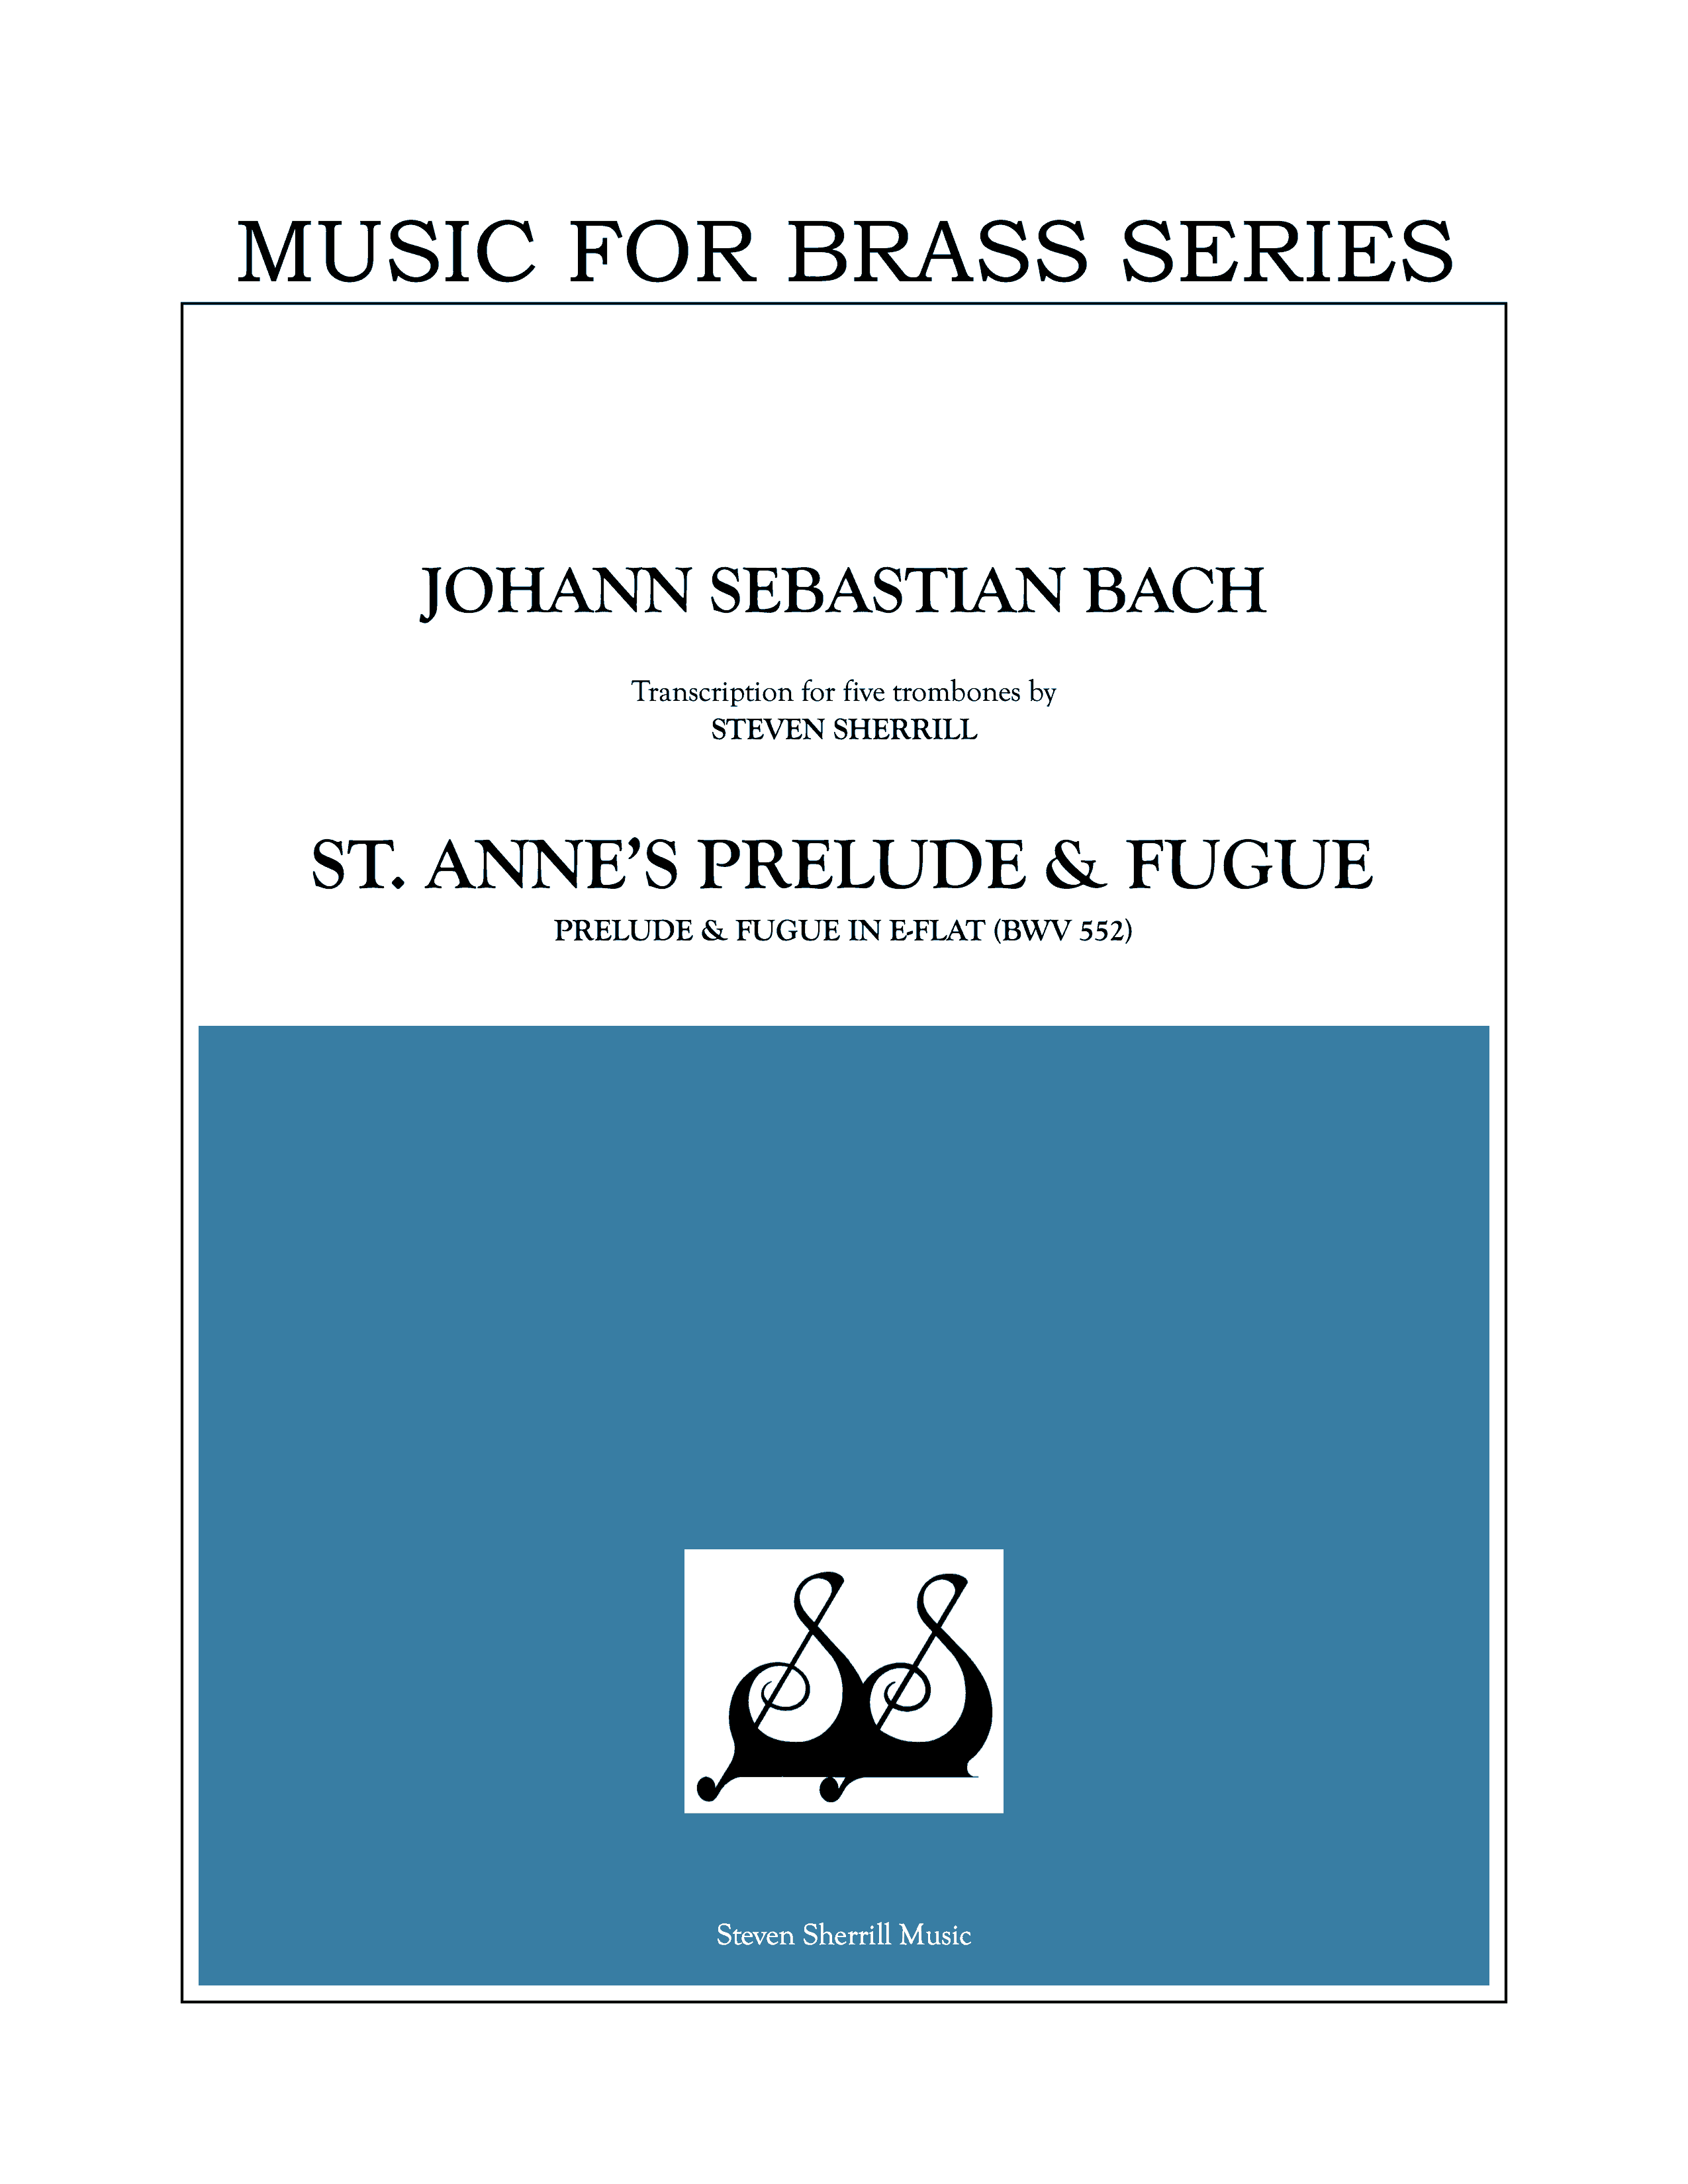 Prelude and Fugue in E-flat (St. Anne's) BWV 552 cover page